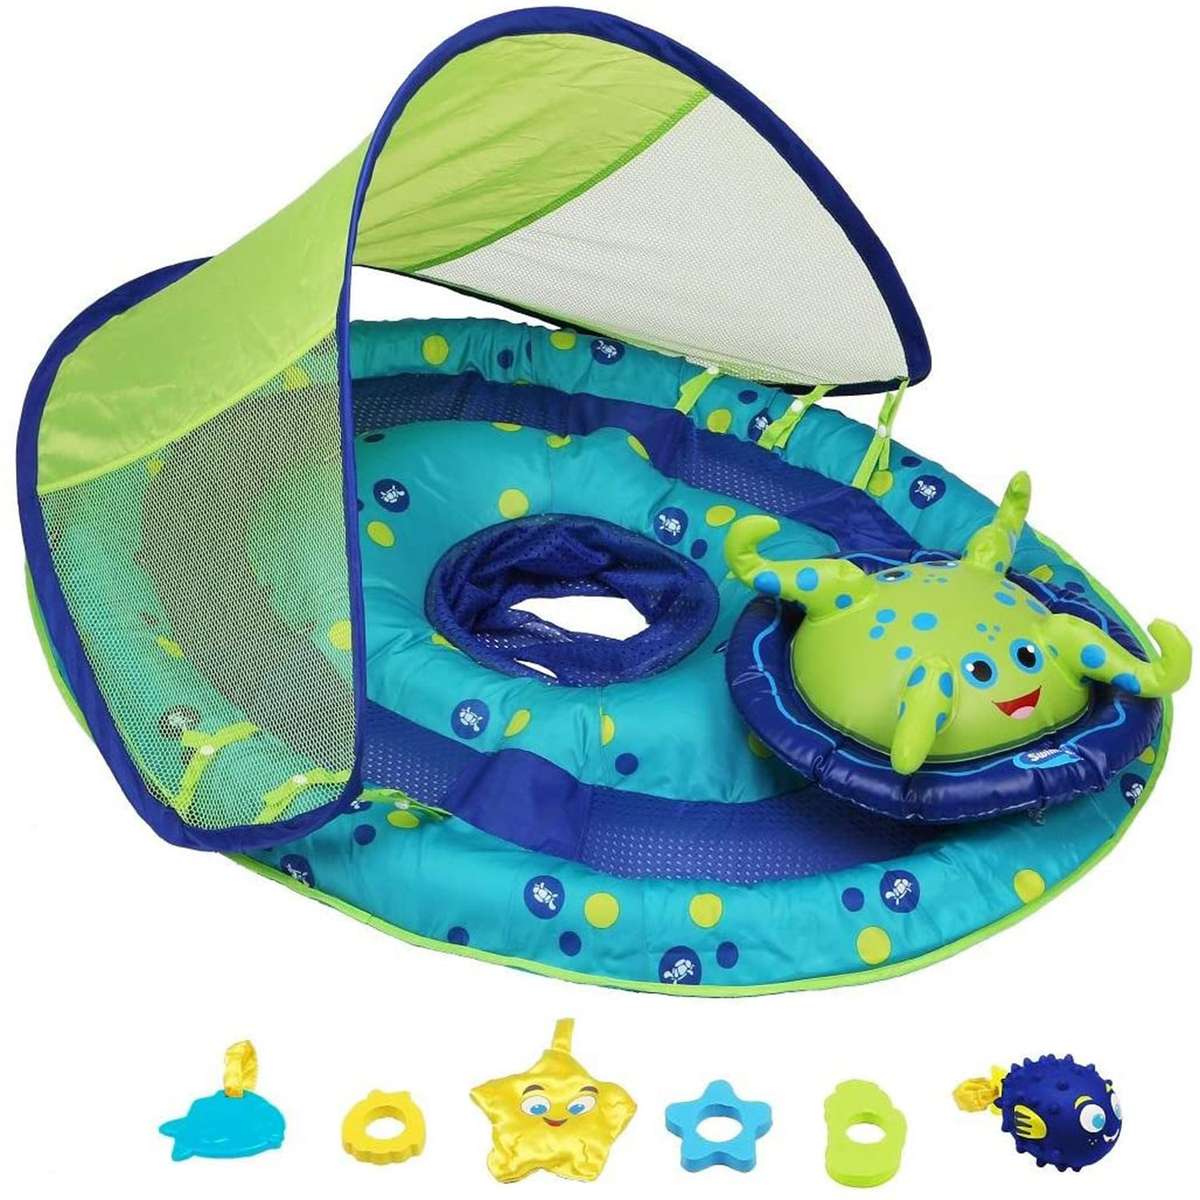 SwimWays Baby Spring Float Activity Center with Canopy